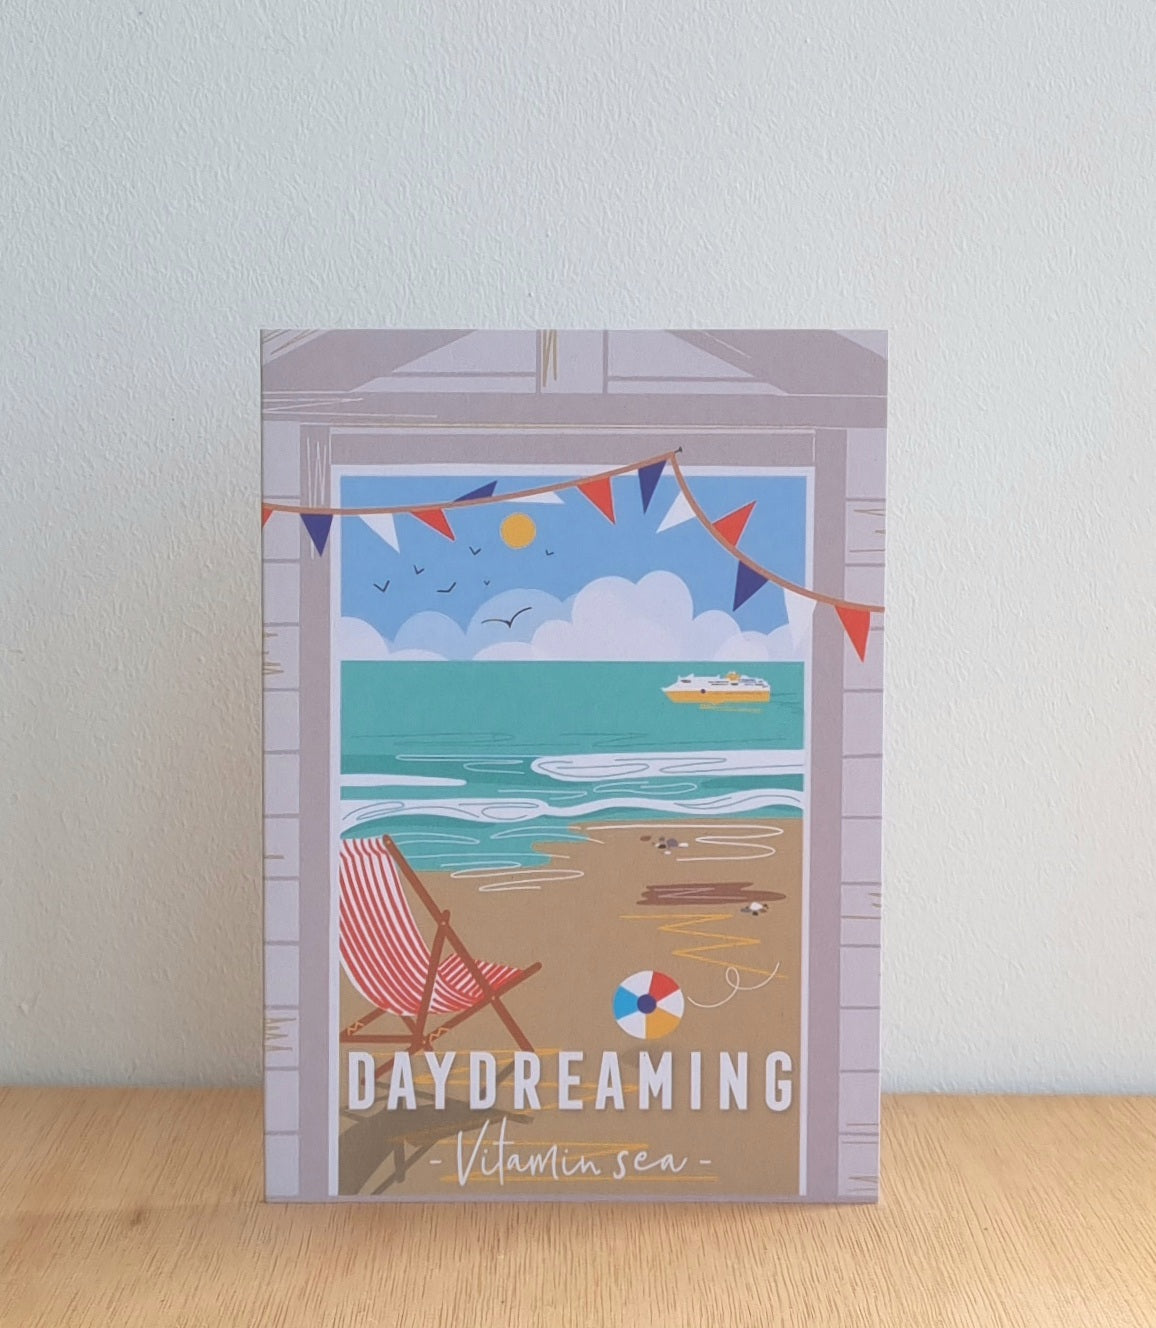 Daydreaming card